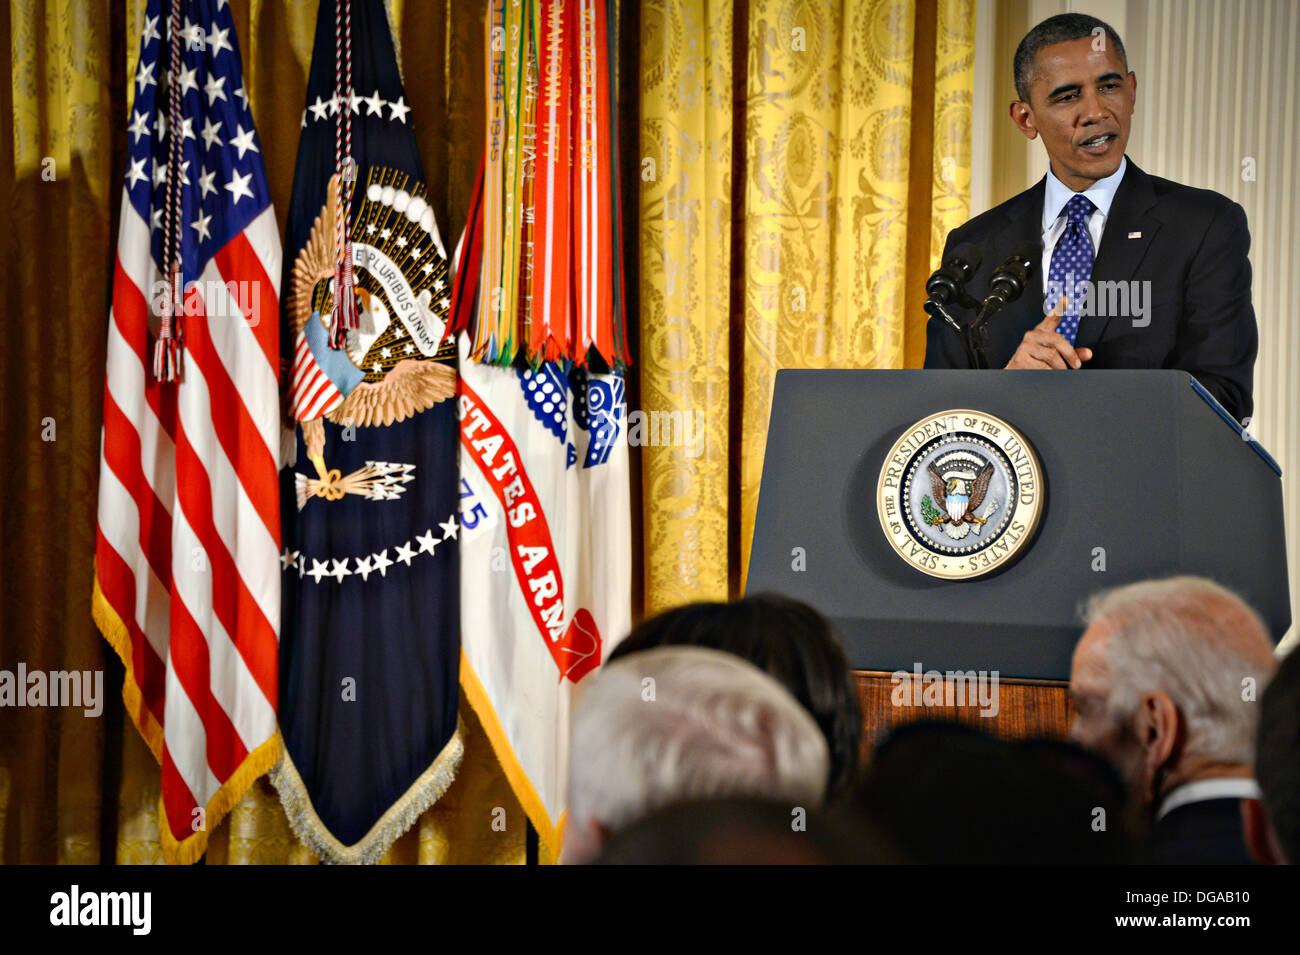 US President Barack Obama speaks during the Medal of Honor ceremony for Army Capt. William D. Swenson in the East Room of the White House October 15, 2013 in Washington, DC. The Medal of Honor is the nation's highest military honor. Stock Photo